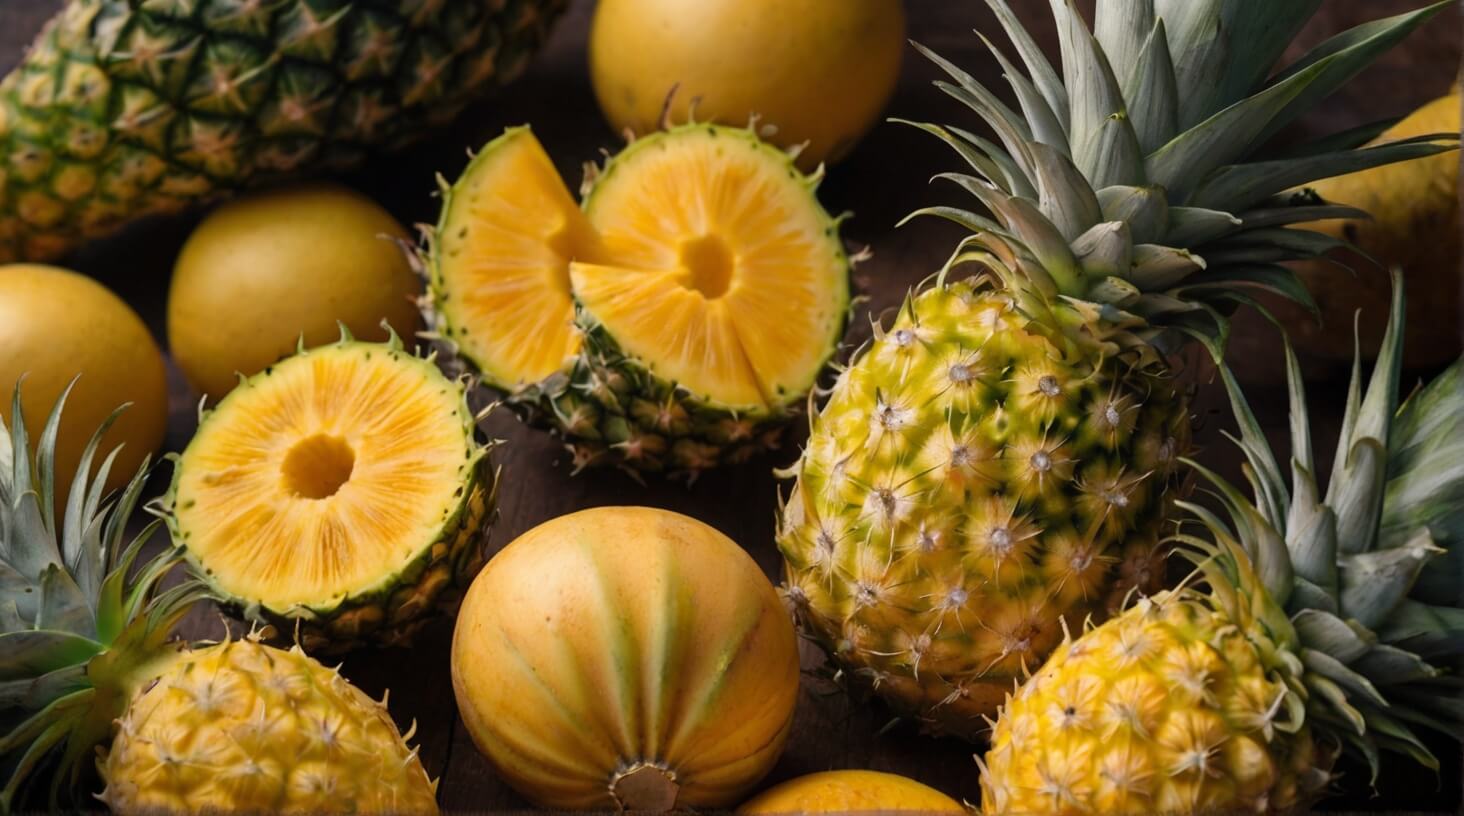 A close-up image of a pineapple